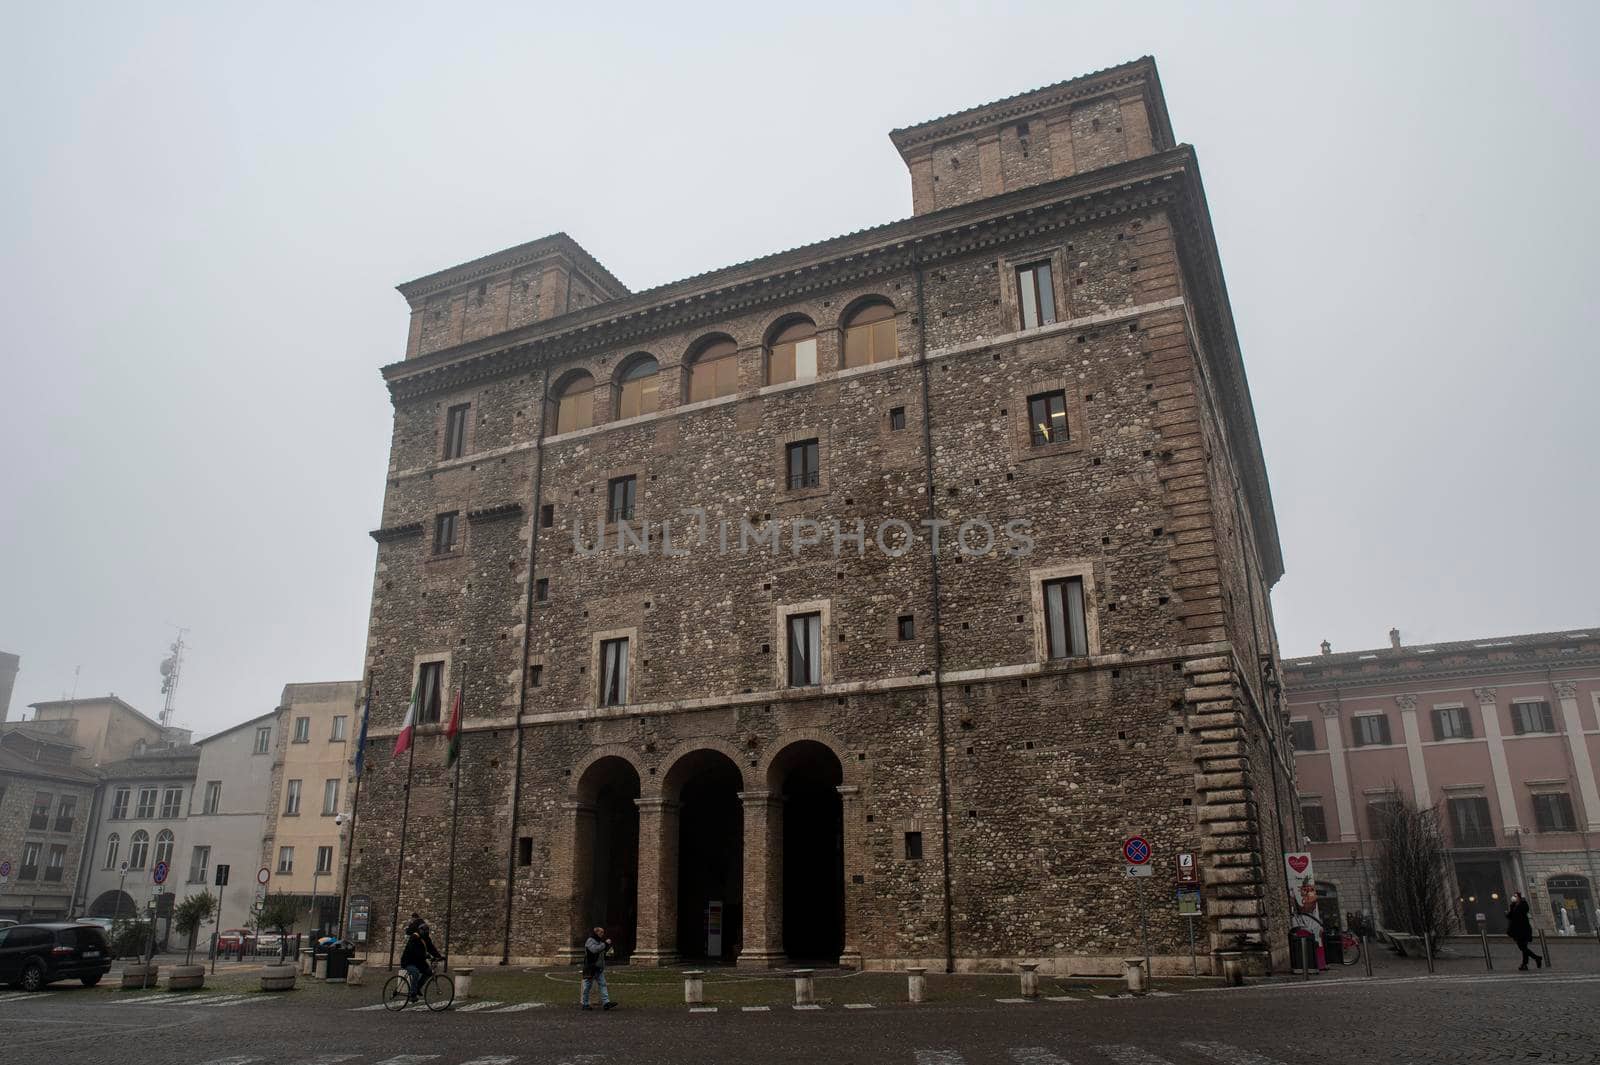 terni,italy january 17 2022:terni square of people and the town called Palazzo Spada with fog